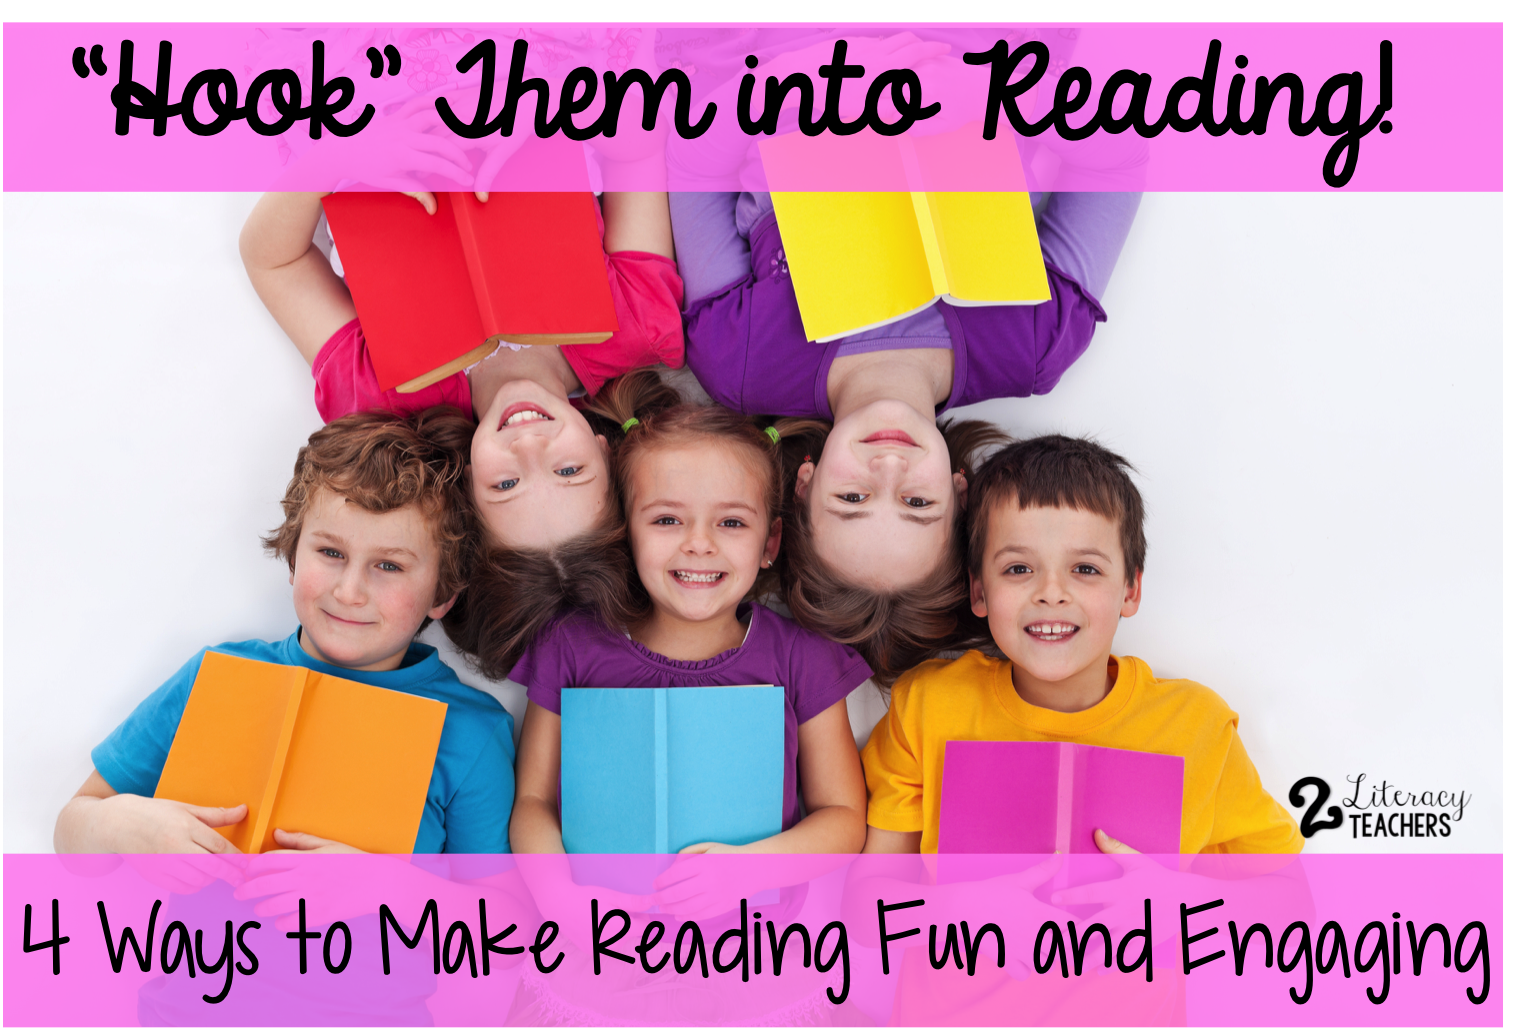 Let’s Make Reading Fun Again! Here’s How!